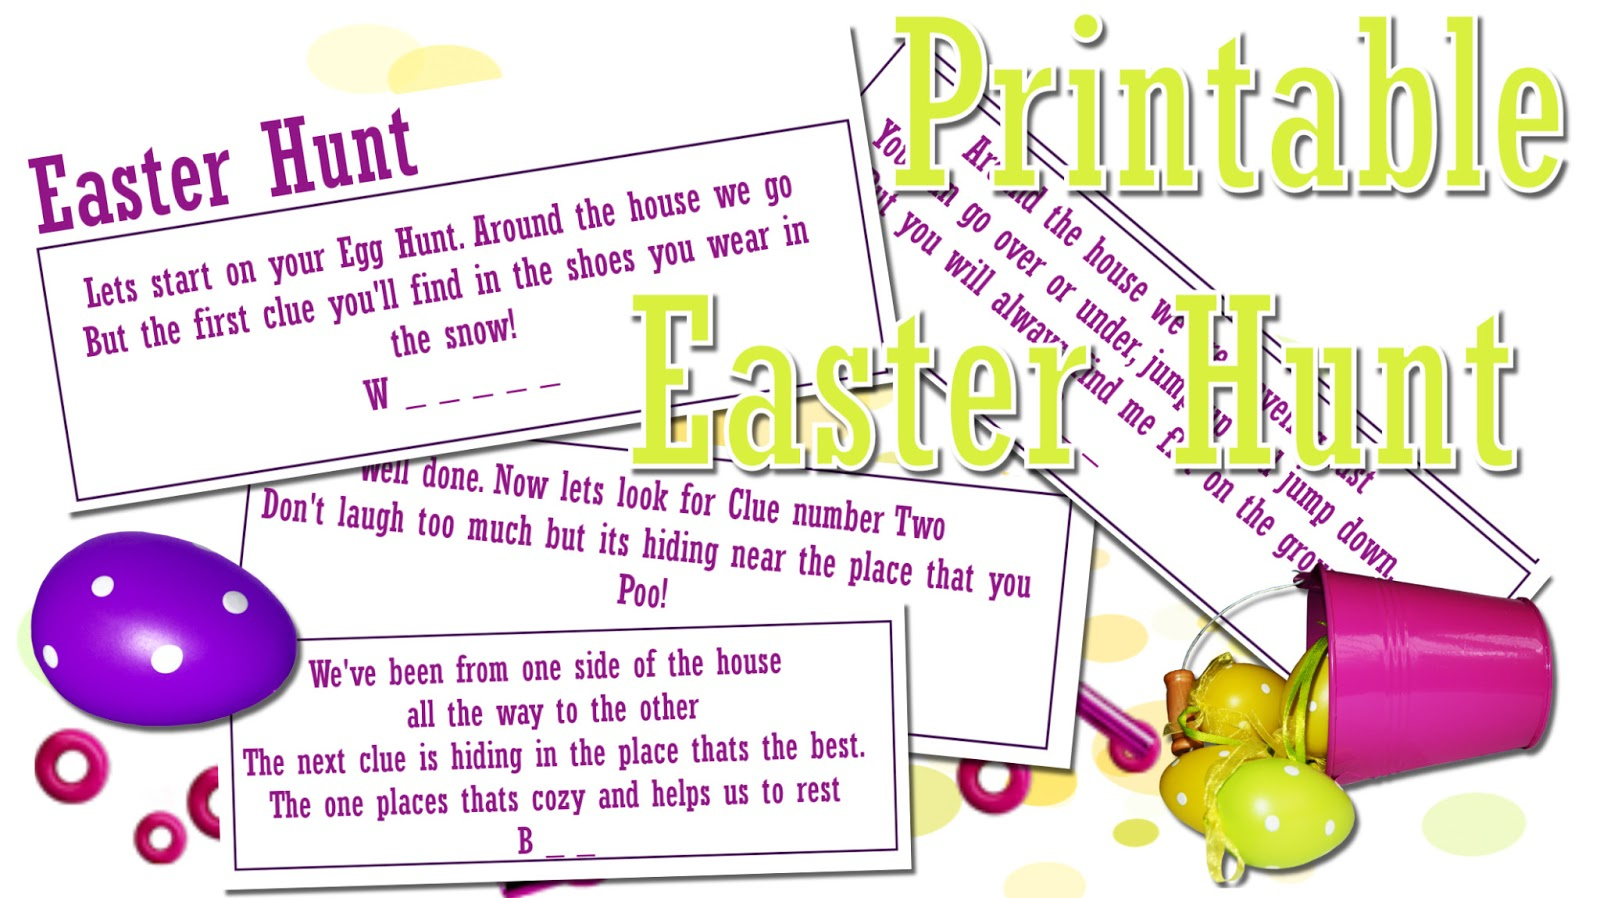 This Is Me Sarah Mum Of 3: Fun Easter Egg Hunt - Print Out! - Easter Scavenger Hunt Riddles Free Printable